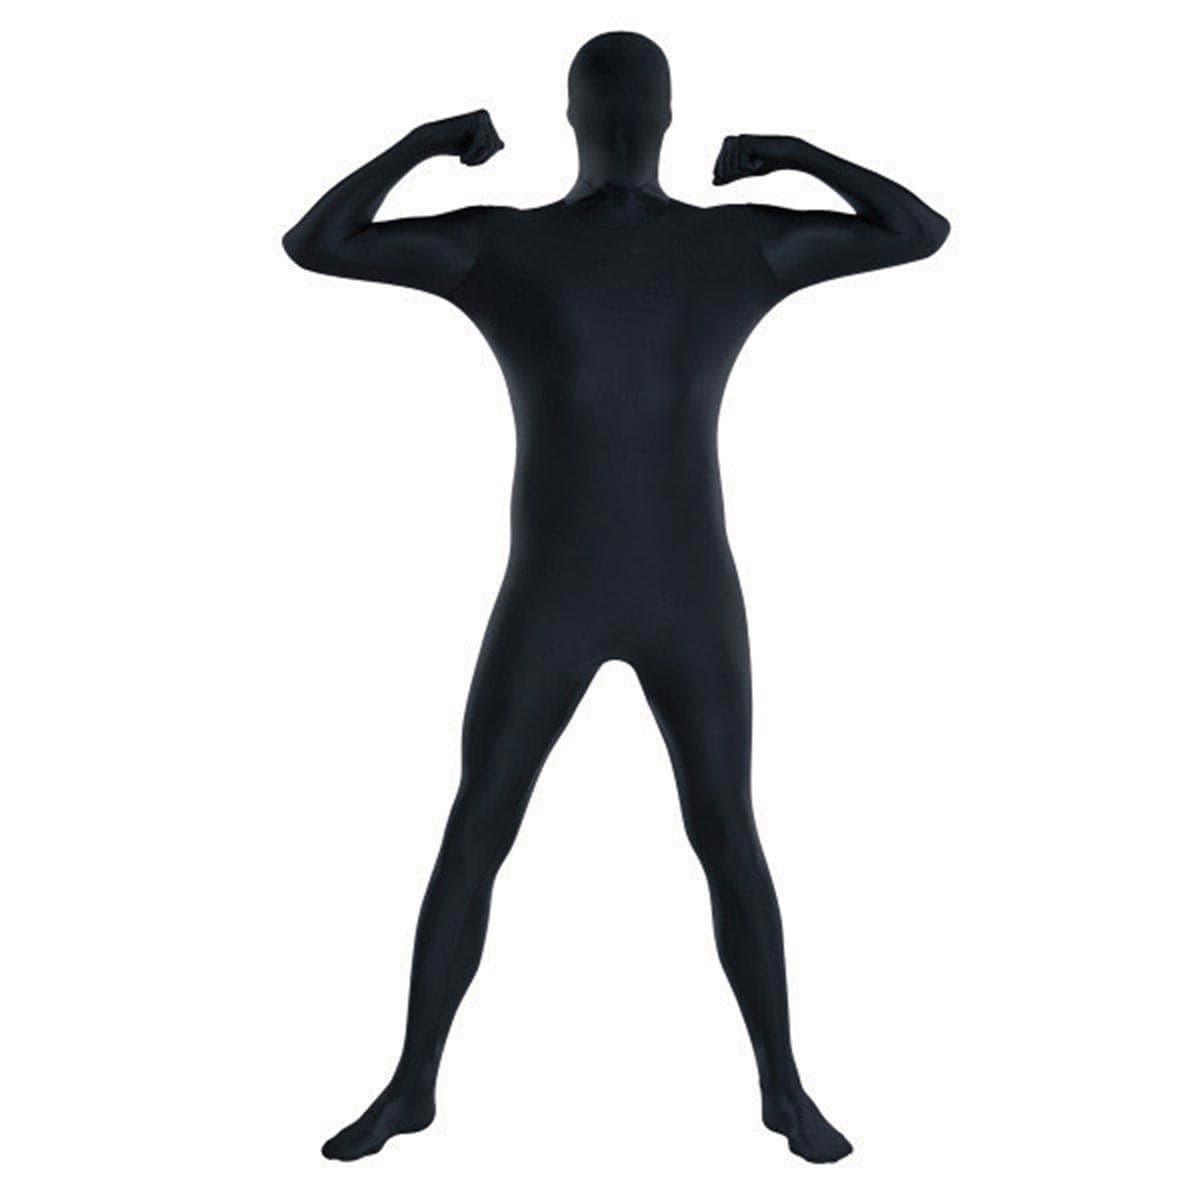 Buy Costumes Black Morphsuit for Adults sold at Party Expert